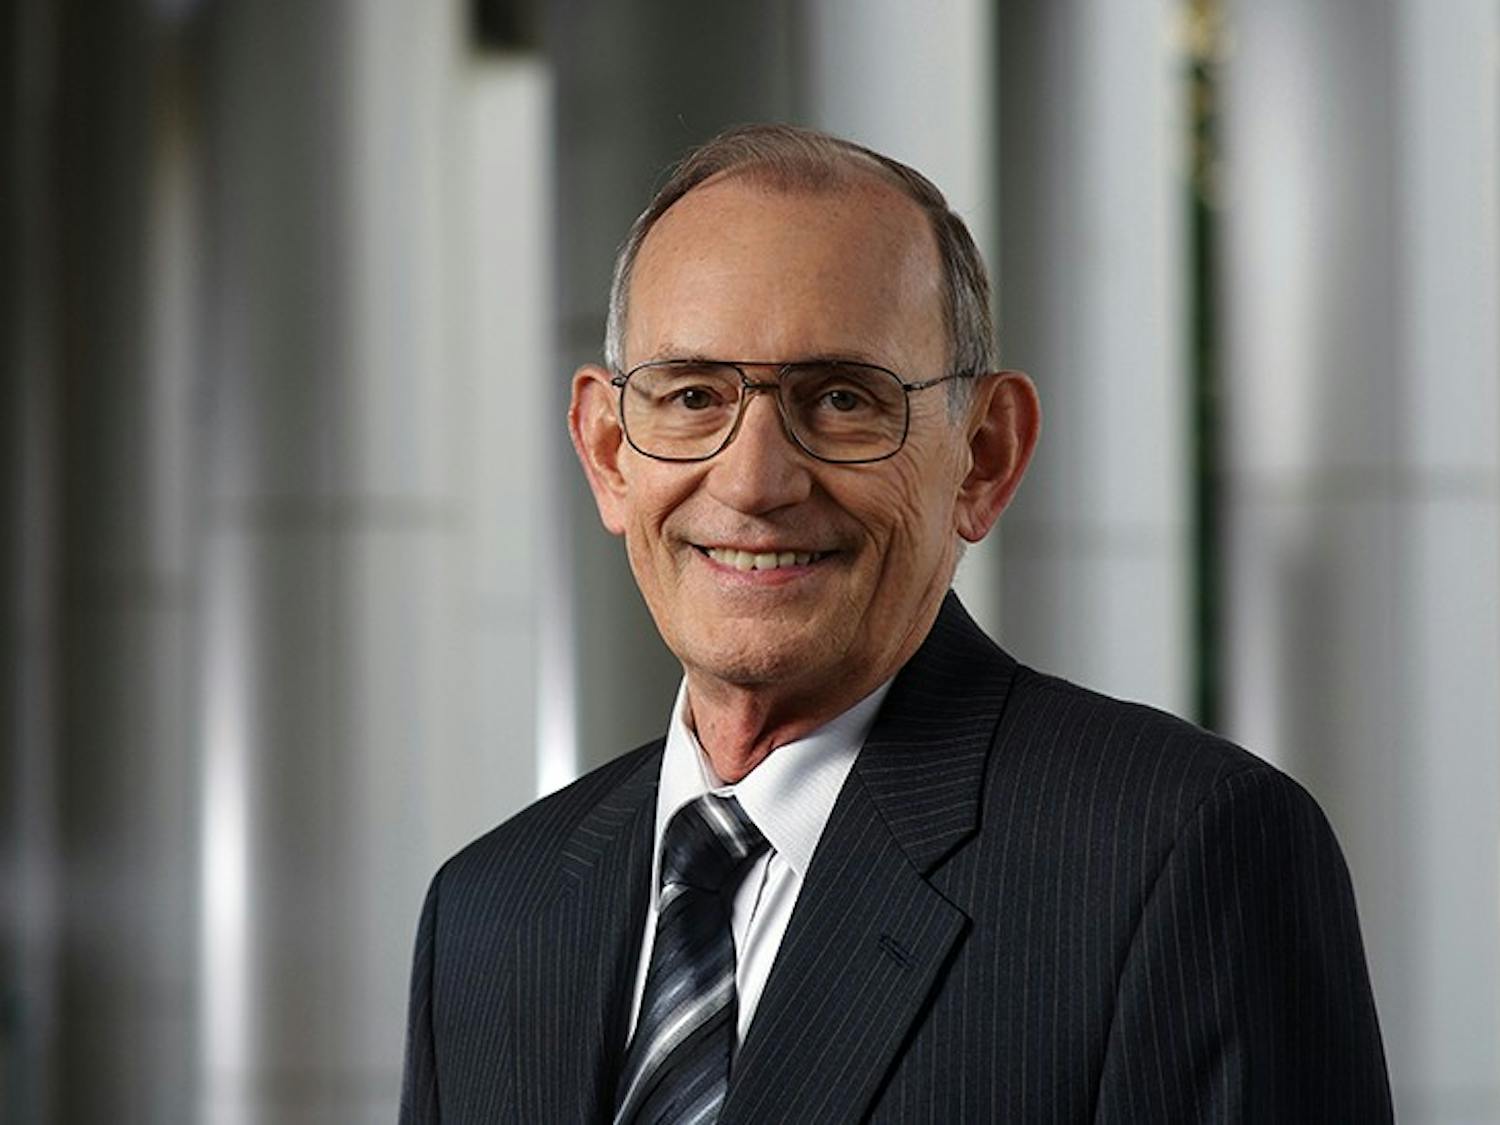 Former Dean of the UW-Madison College of Engineering, Paul Peercy,&nbsp;served the university from 1999 until 2013.